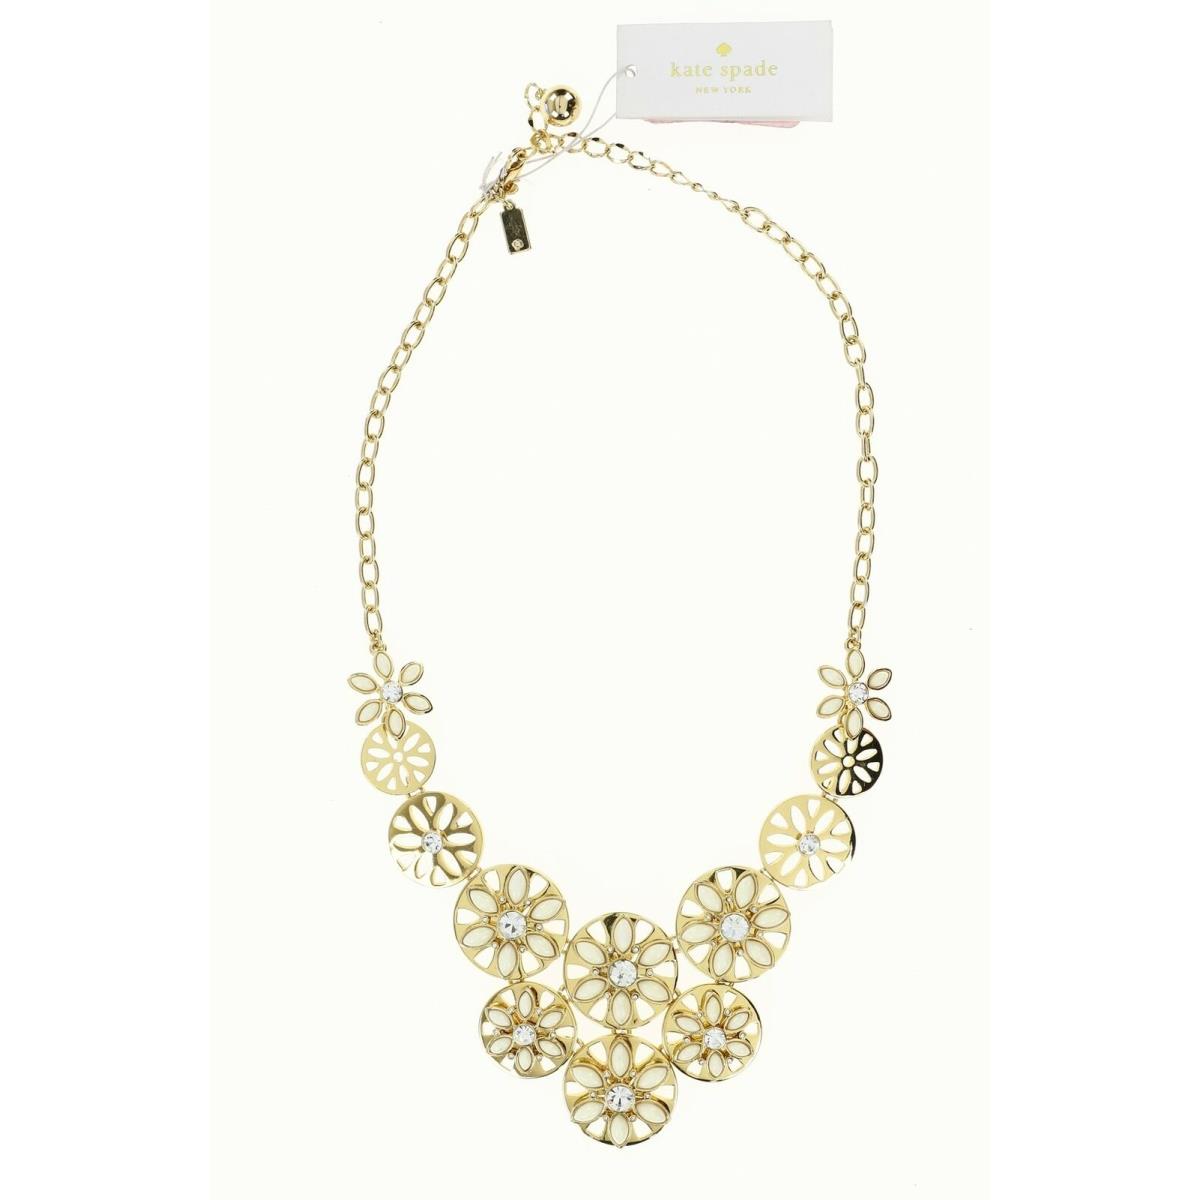 Kate Spade Gold Plated Floral Bib Necklace